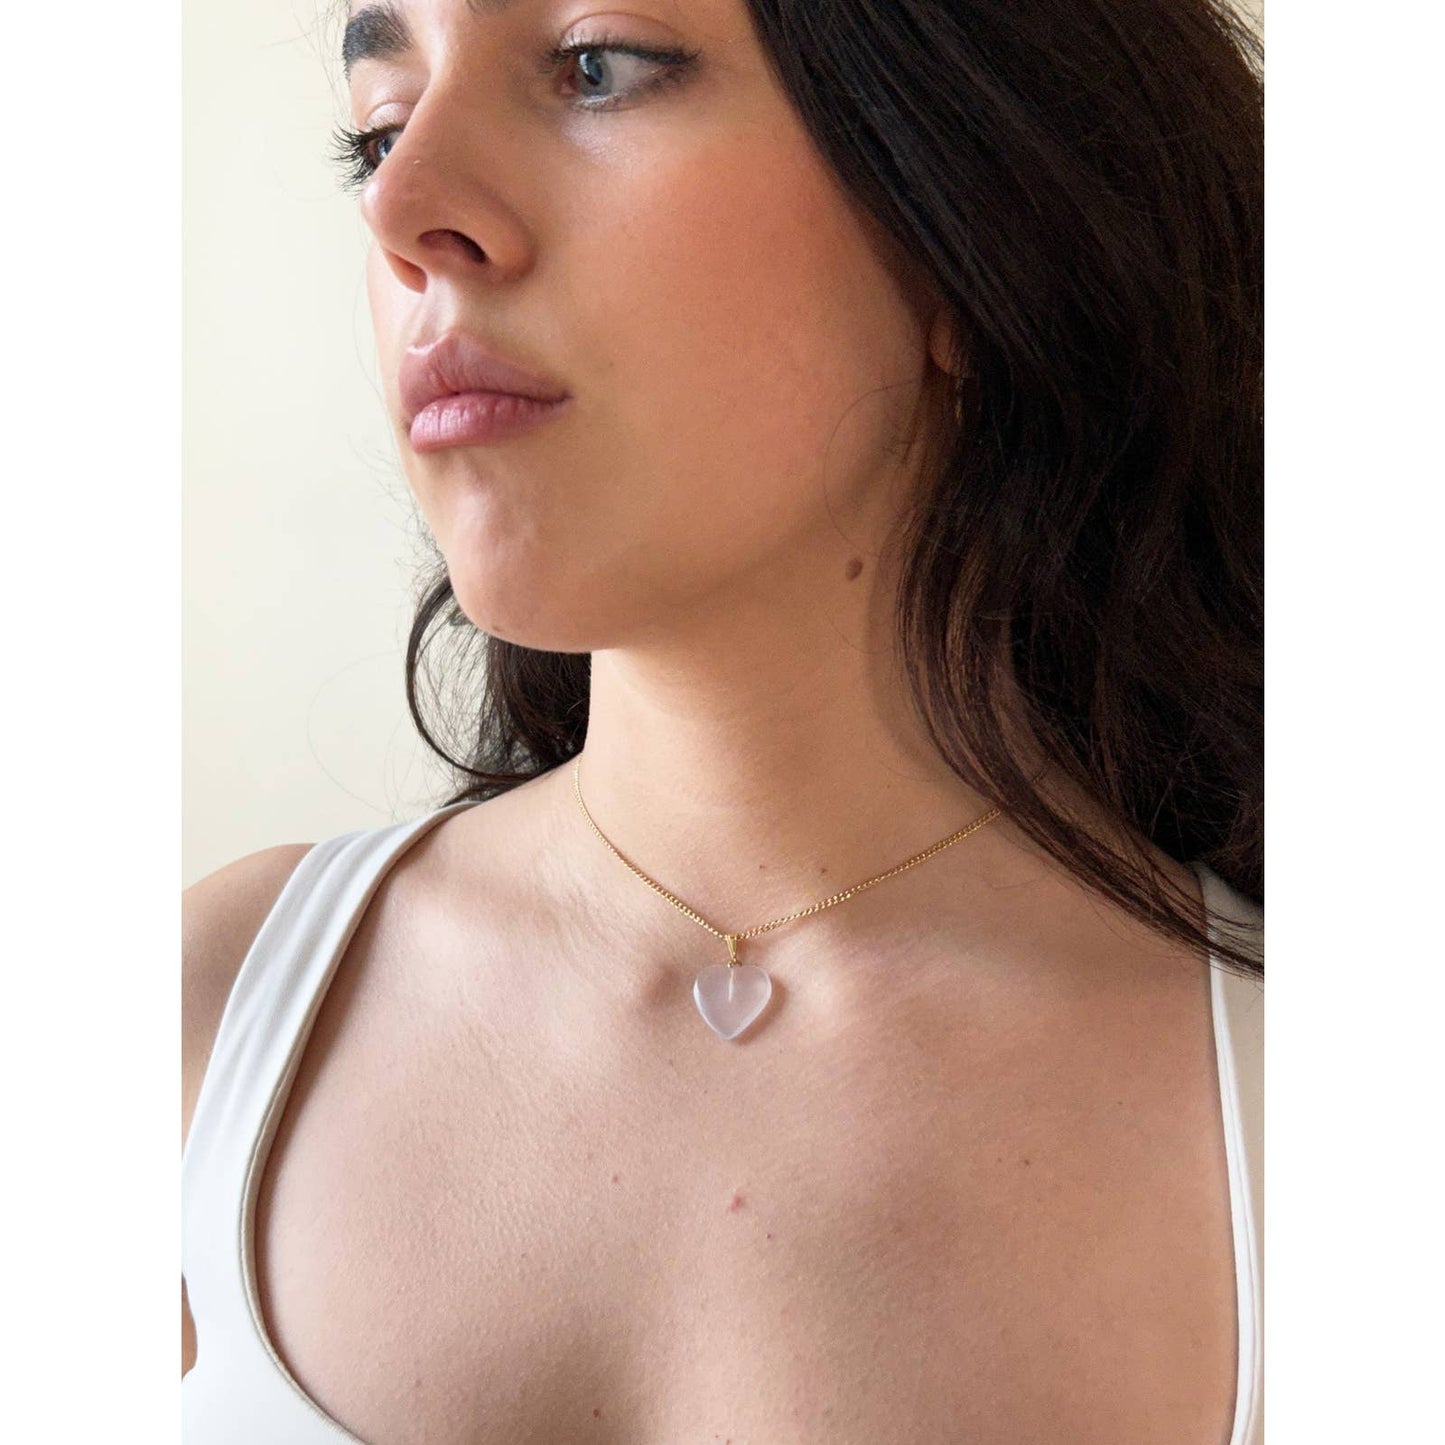 Handmade Stone Heart Charm Necklace on Gold Chain